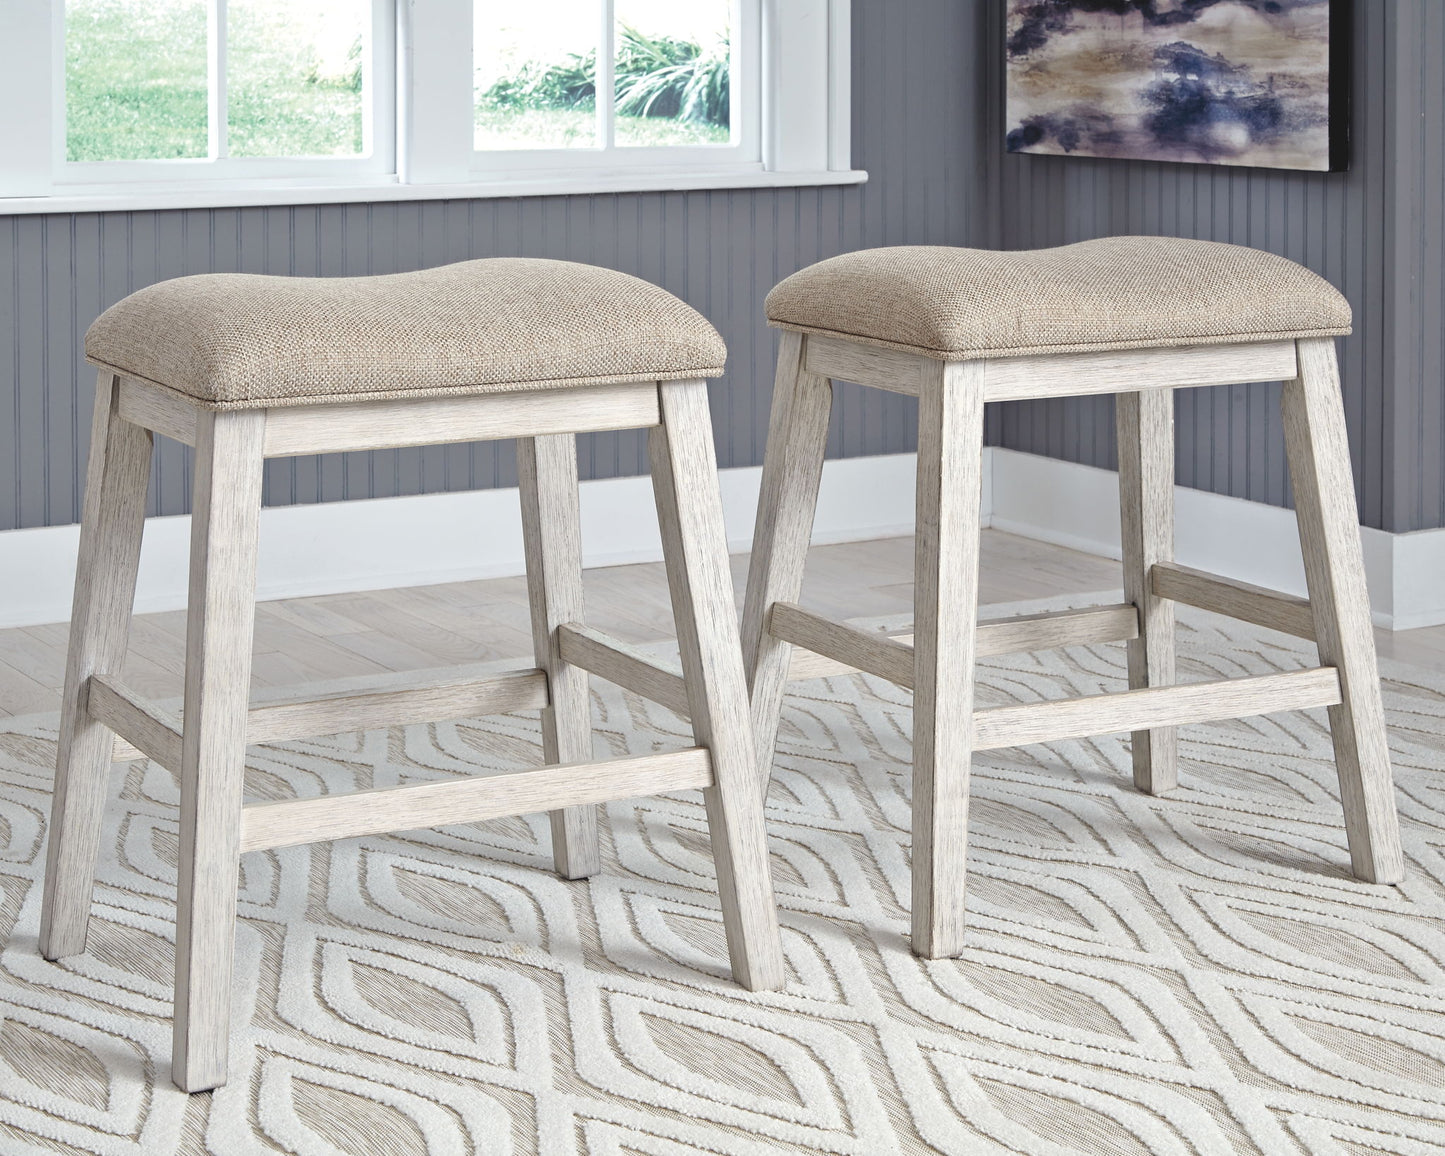 Skempton - White - 5 Pc. - Counter Table, 4 Upholstered Stools